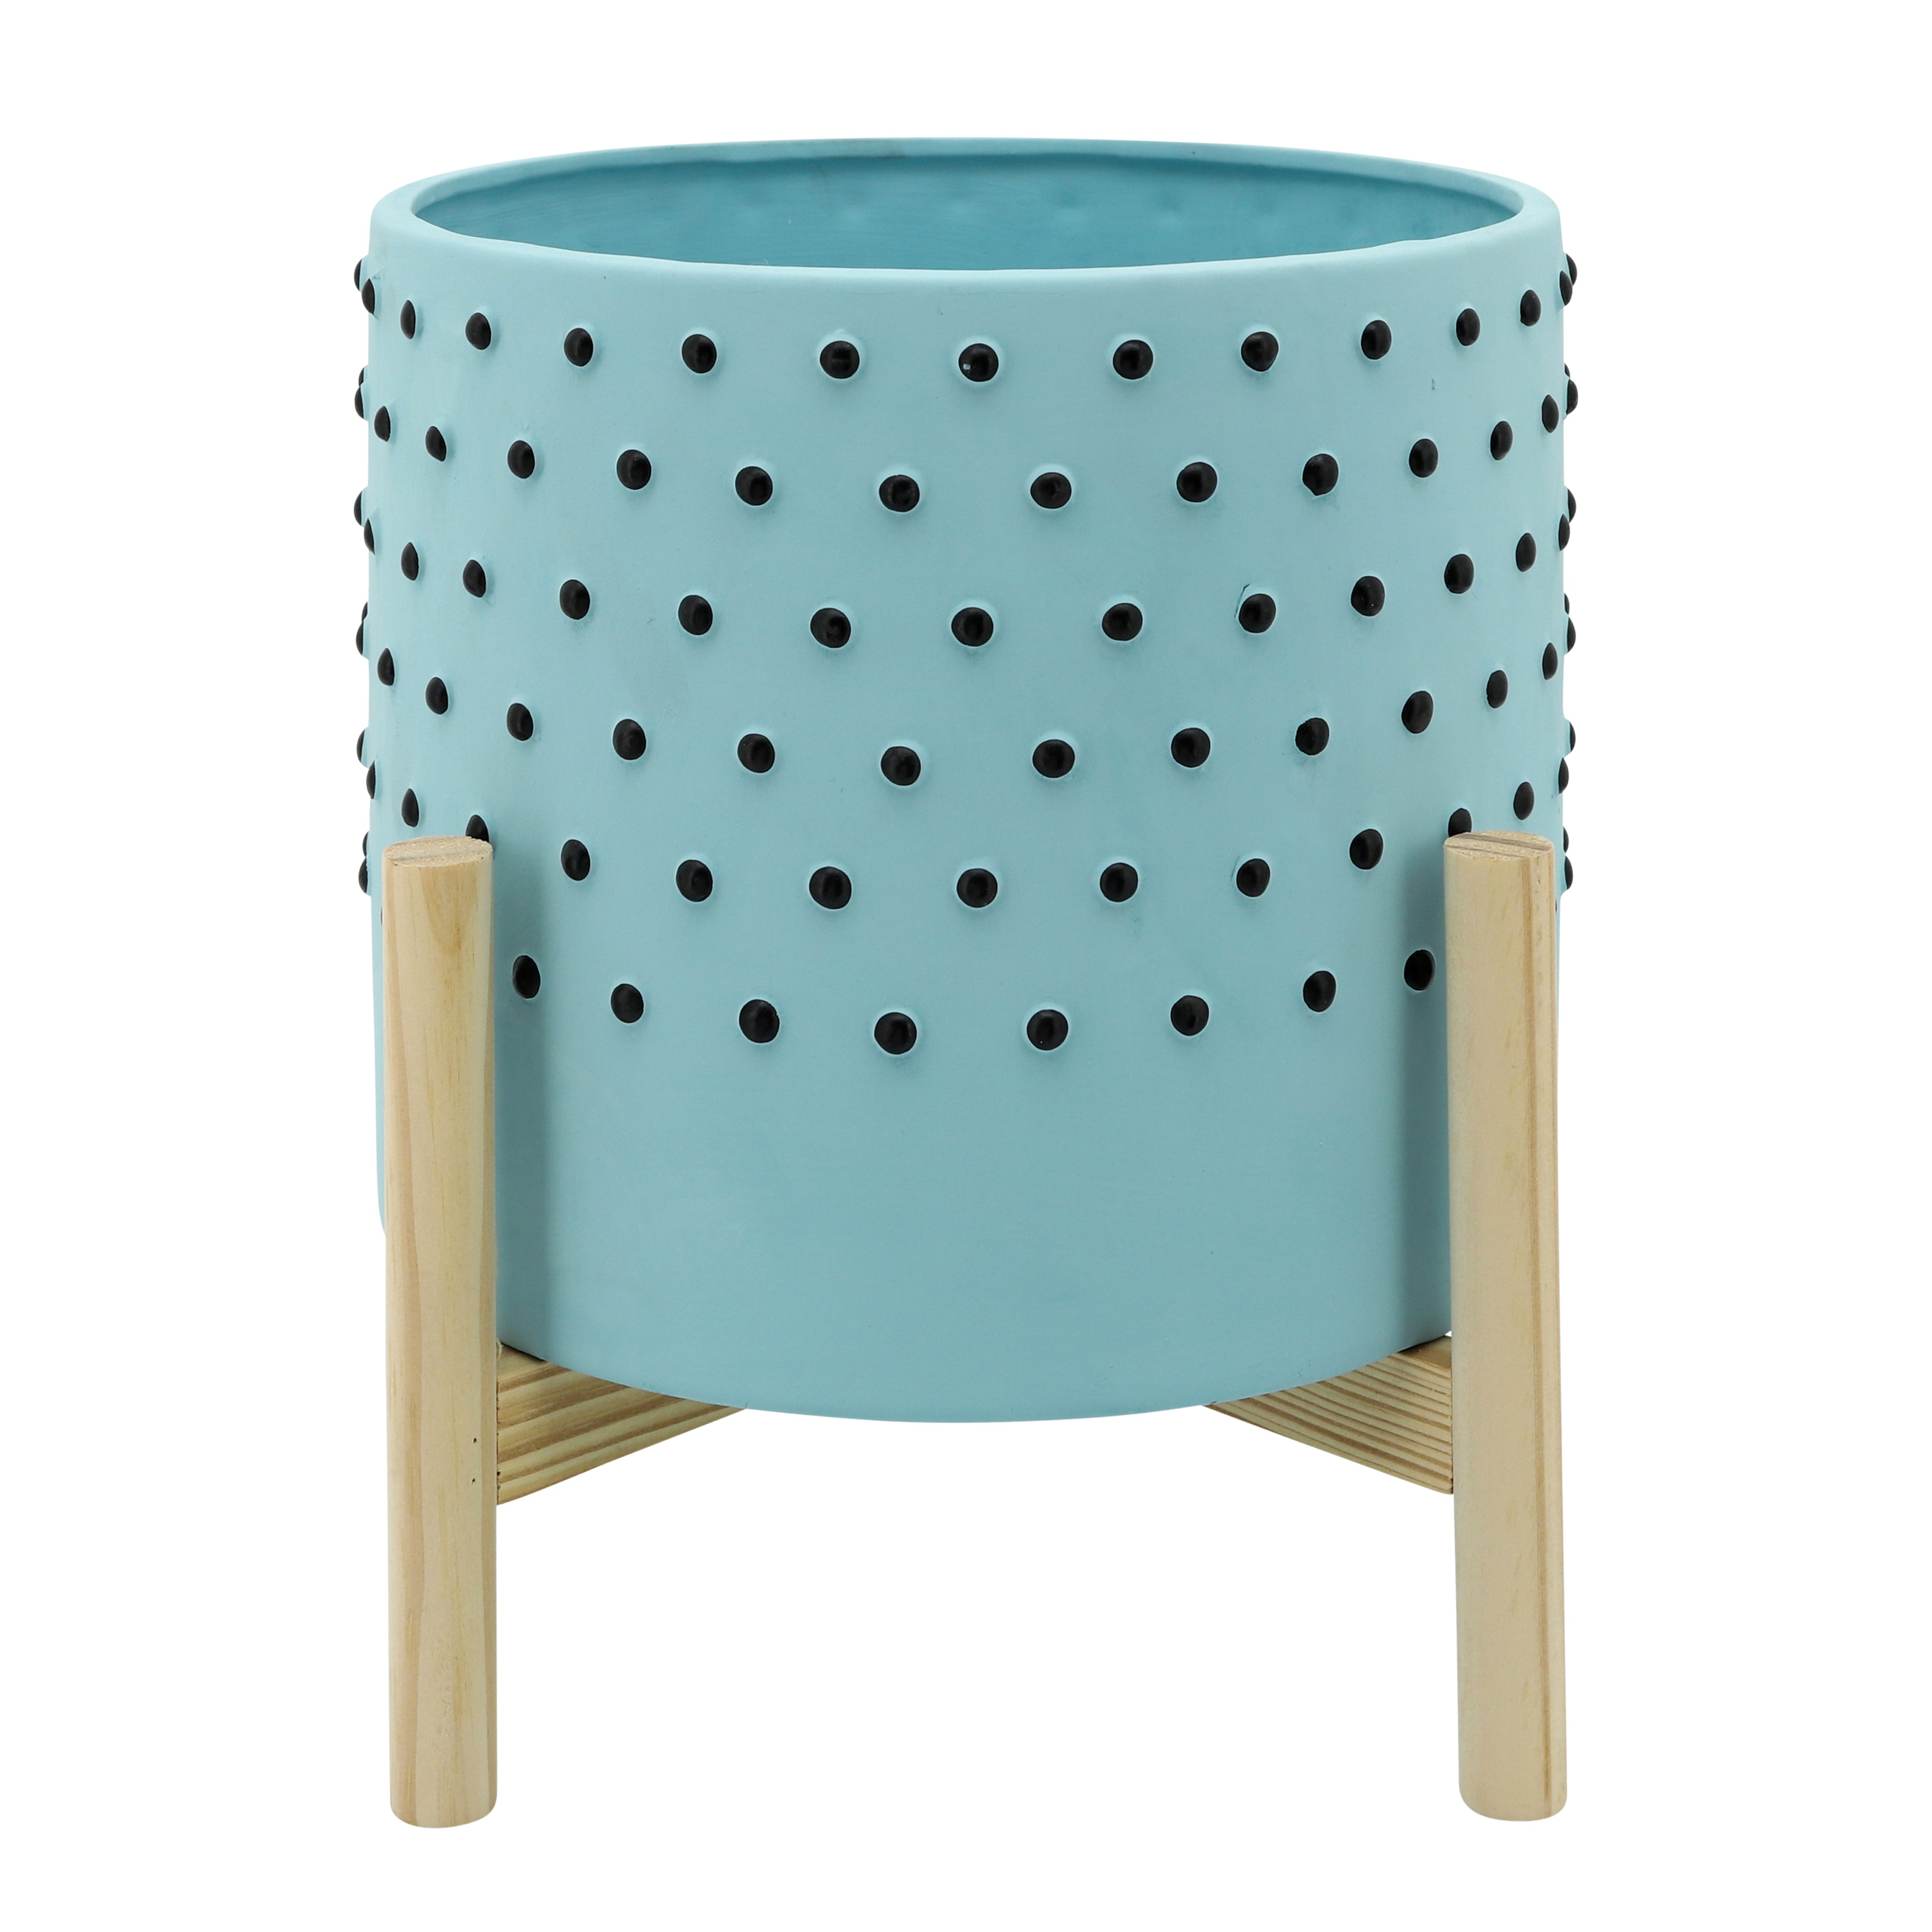 10" Dotted Planter with Wood Stand, Blue, Planters